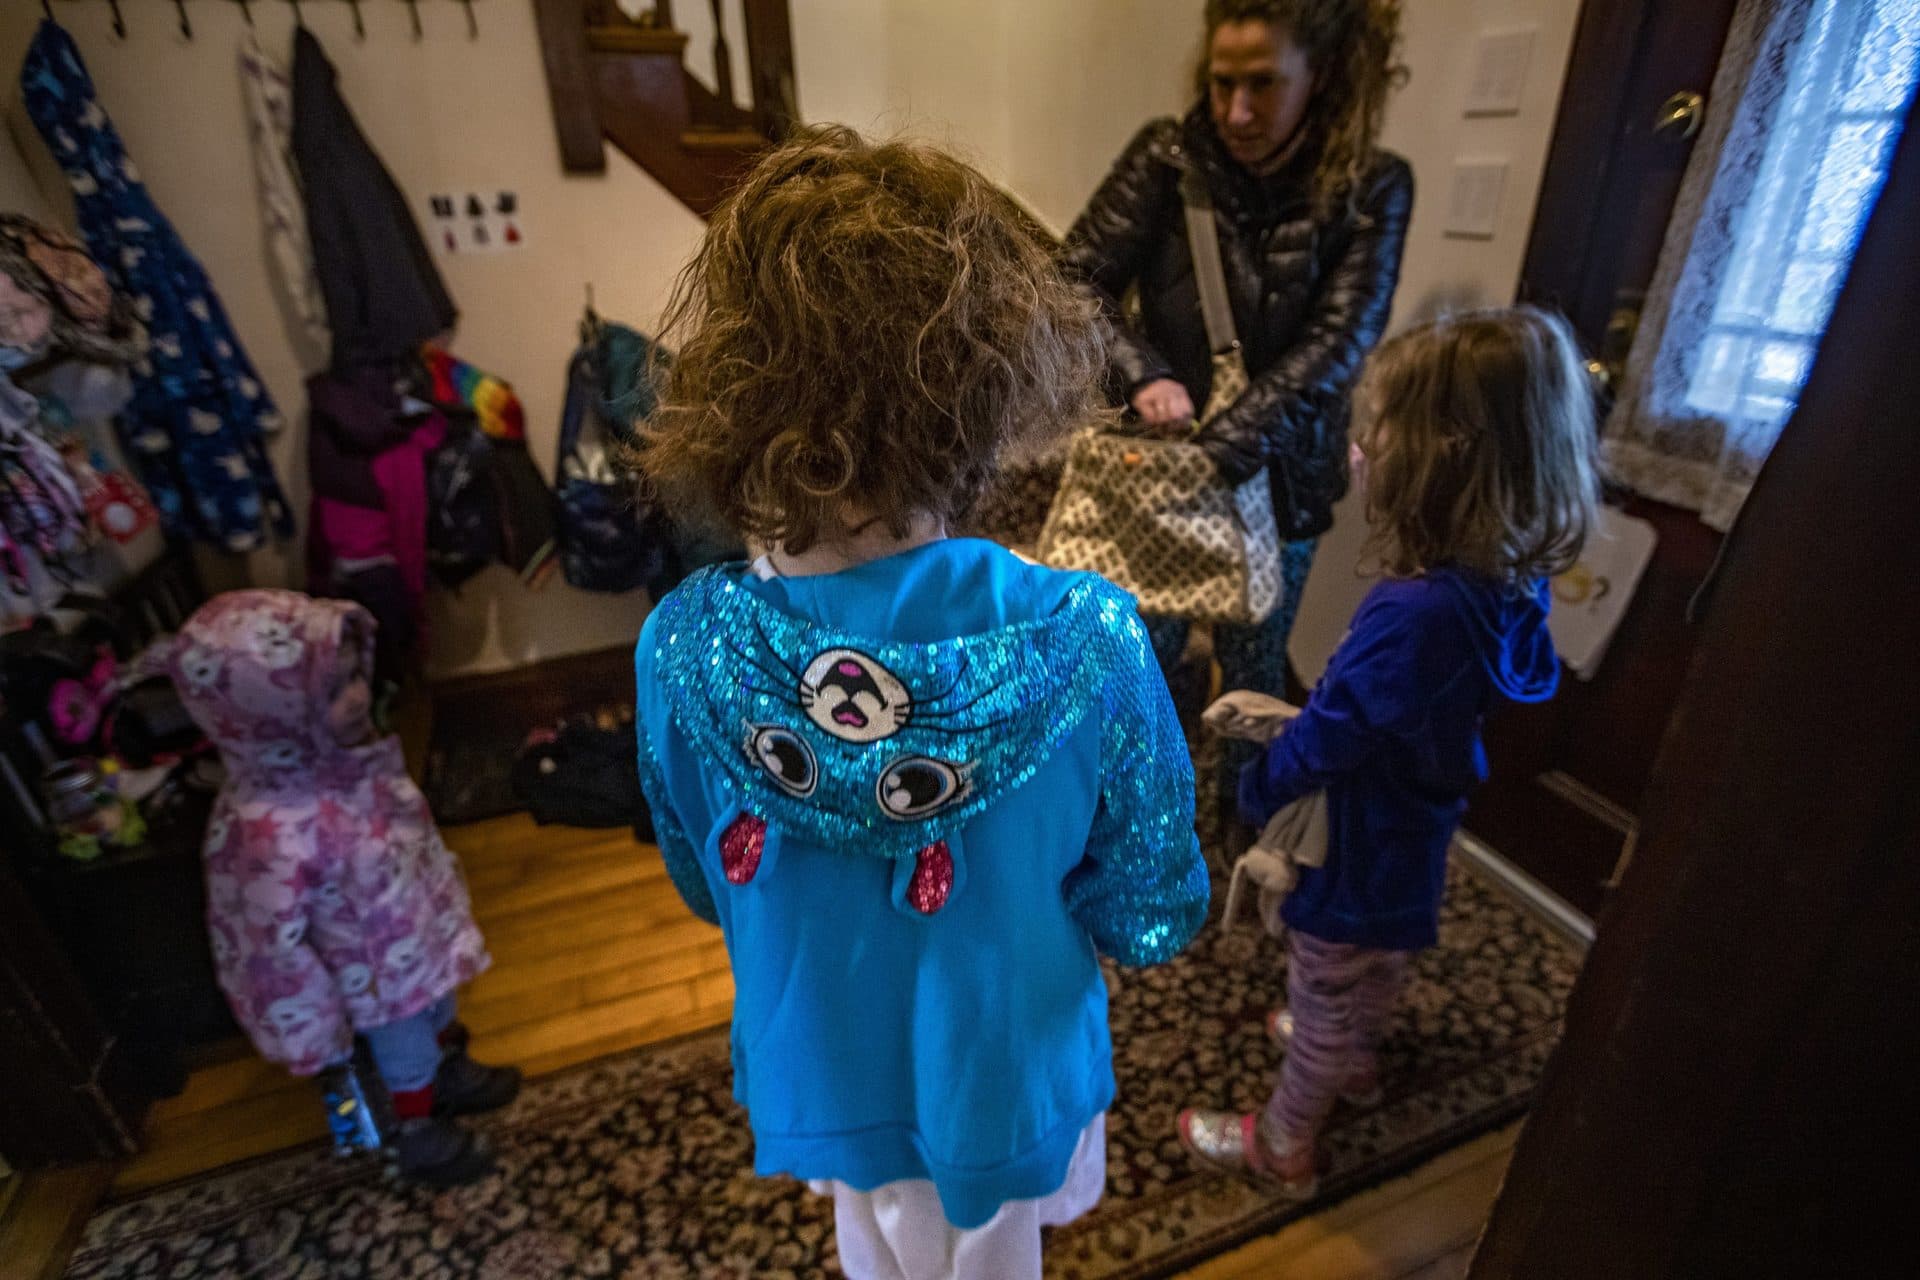 The family gathers in the entryway of their house before heading out to the playground. (Jesse Costa/WBUR)